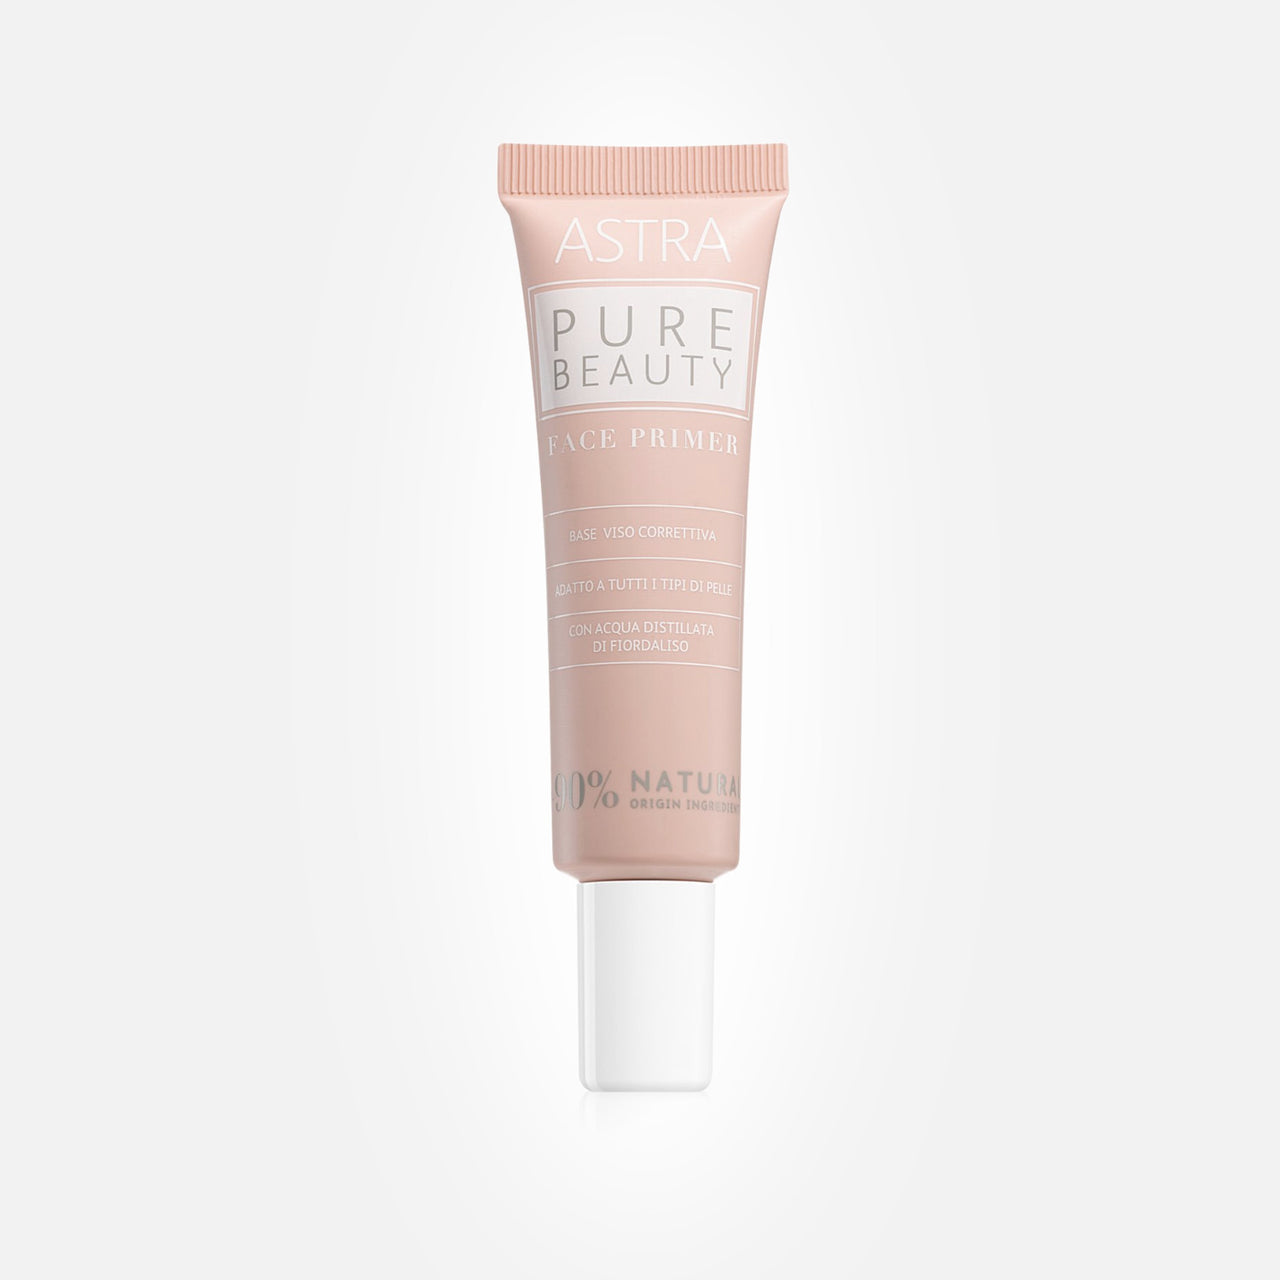 Pure Beauty face primer Astra